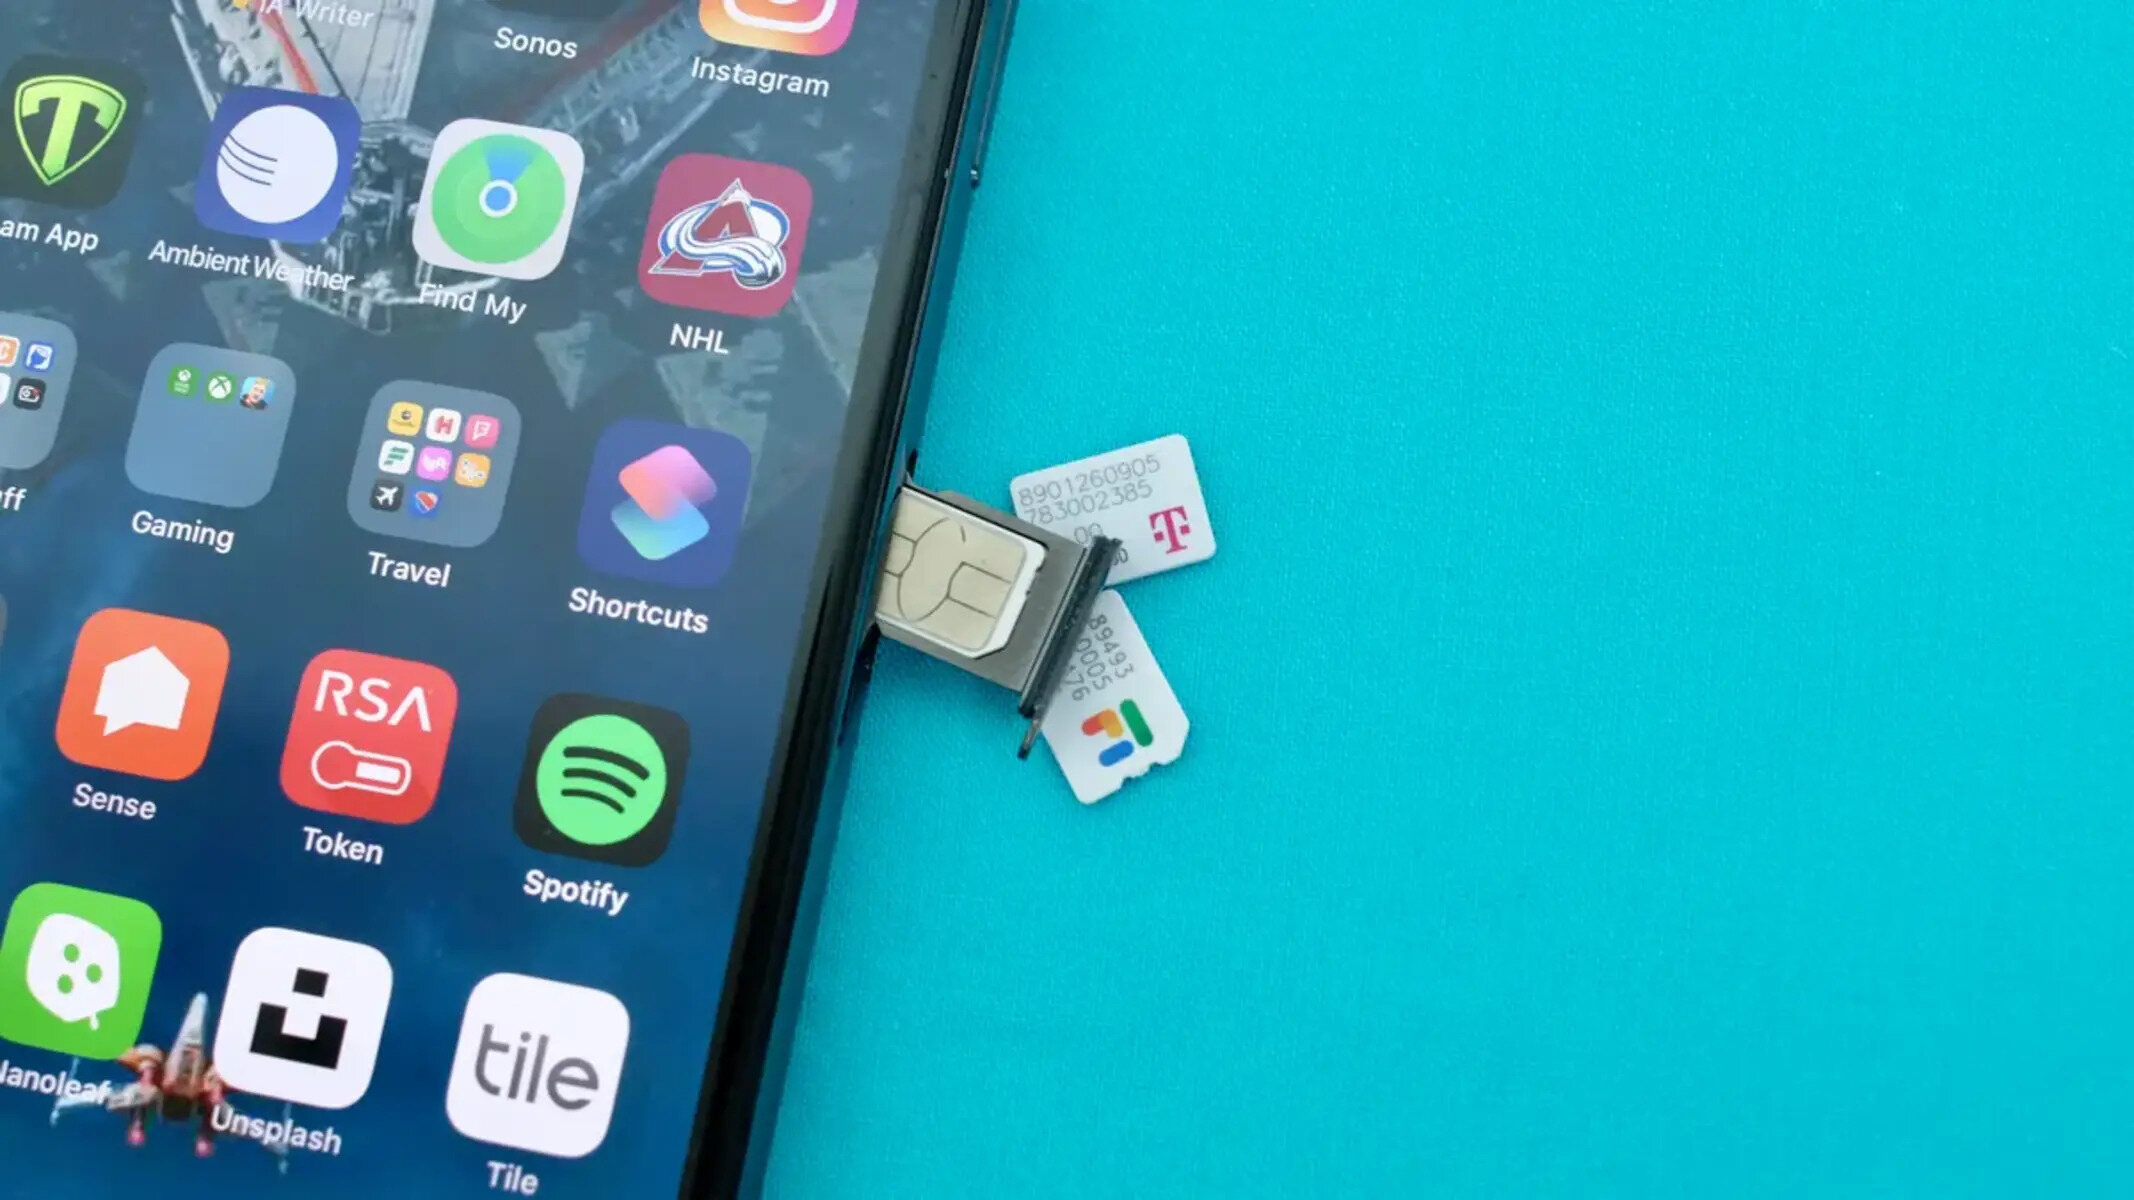 Changing SIM Card And Data Loss: Explained